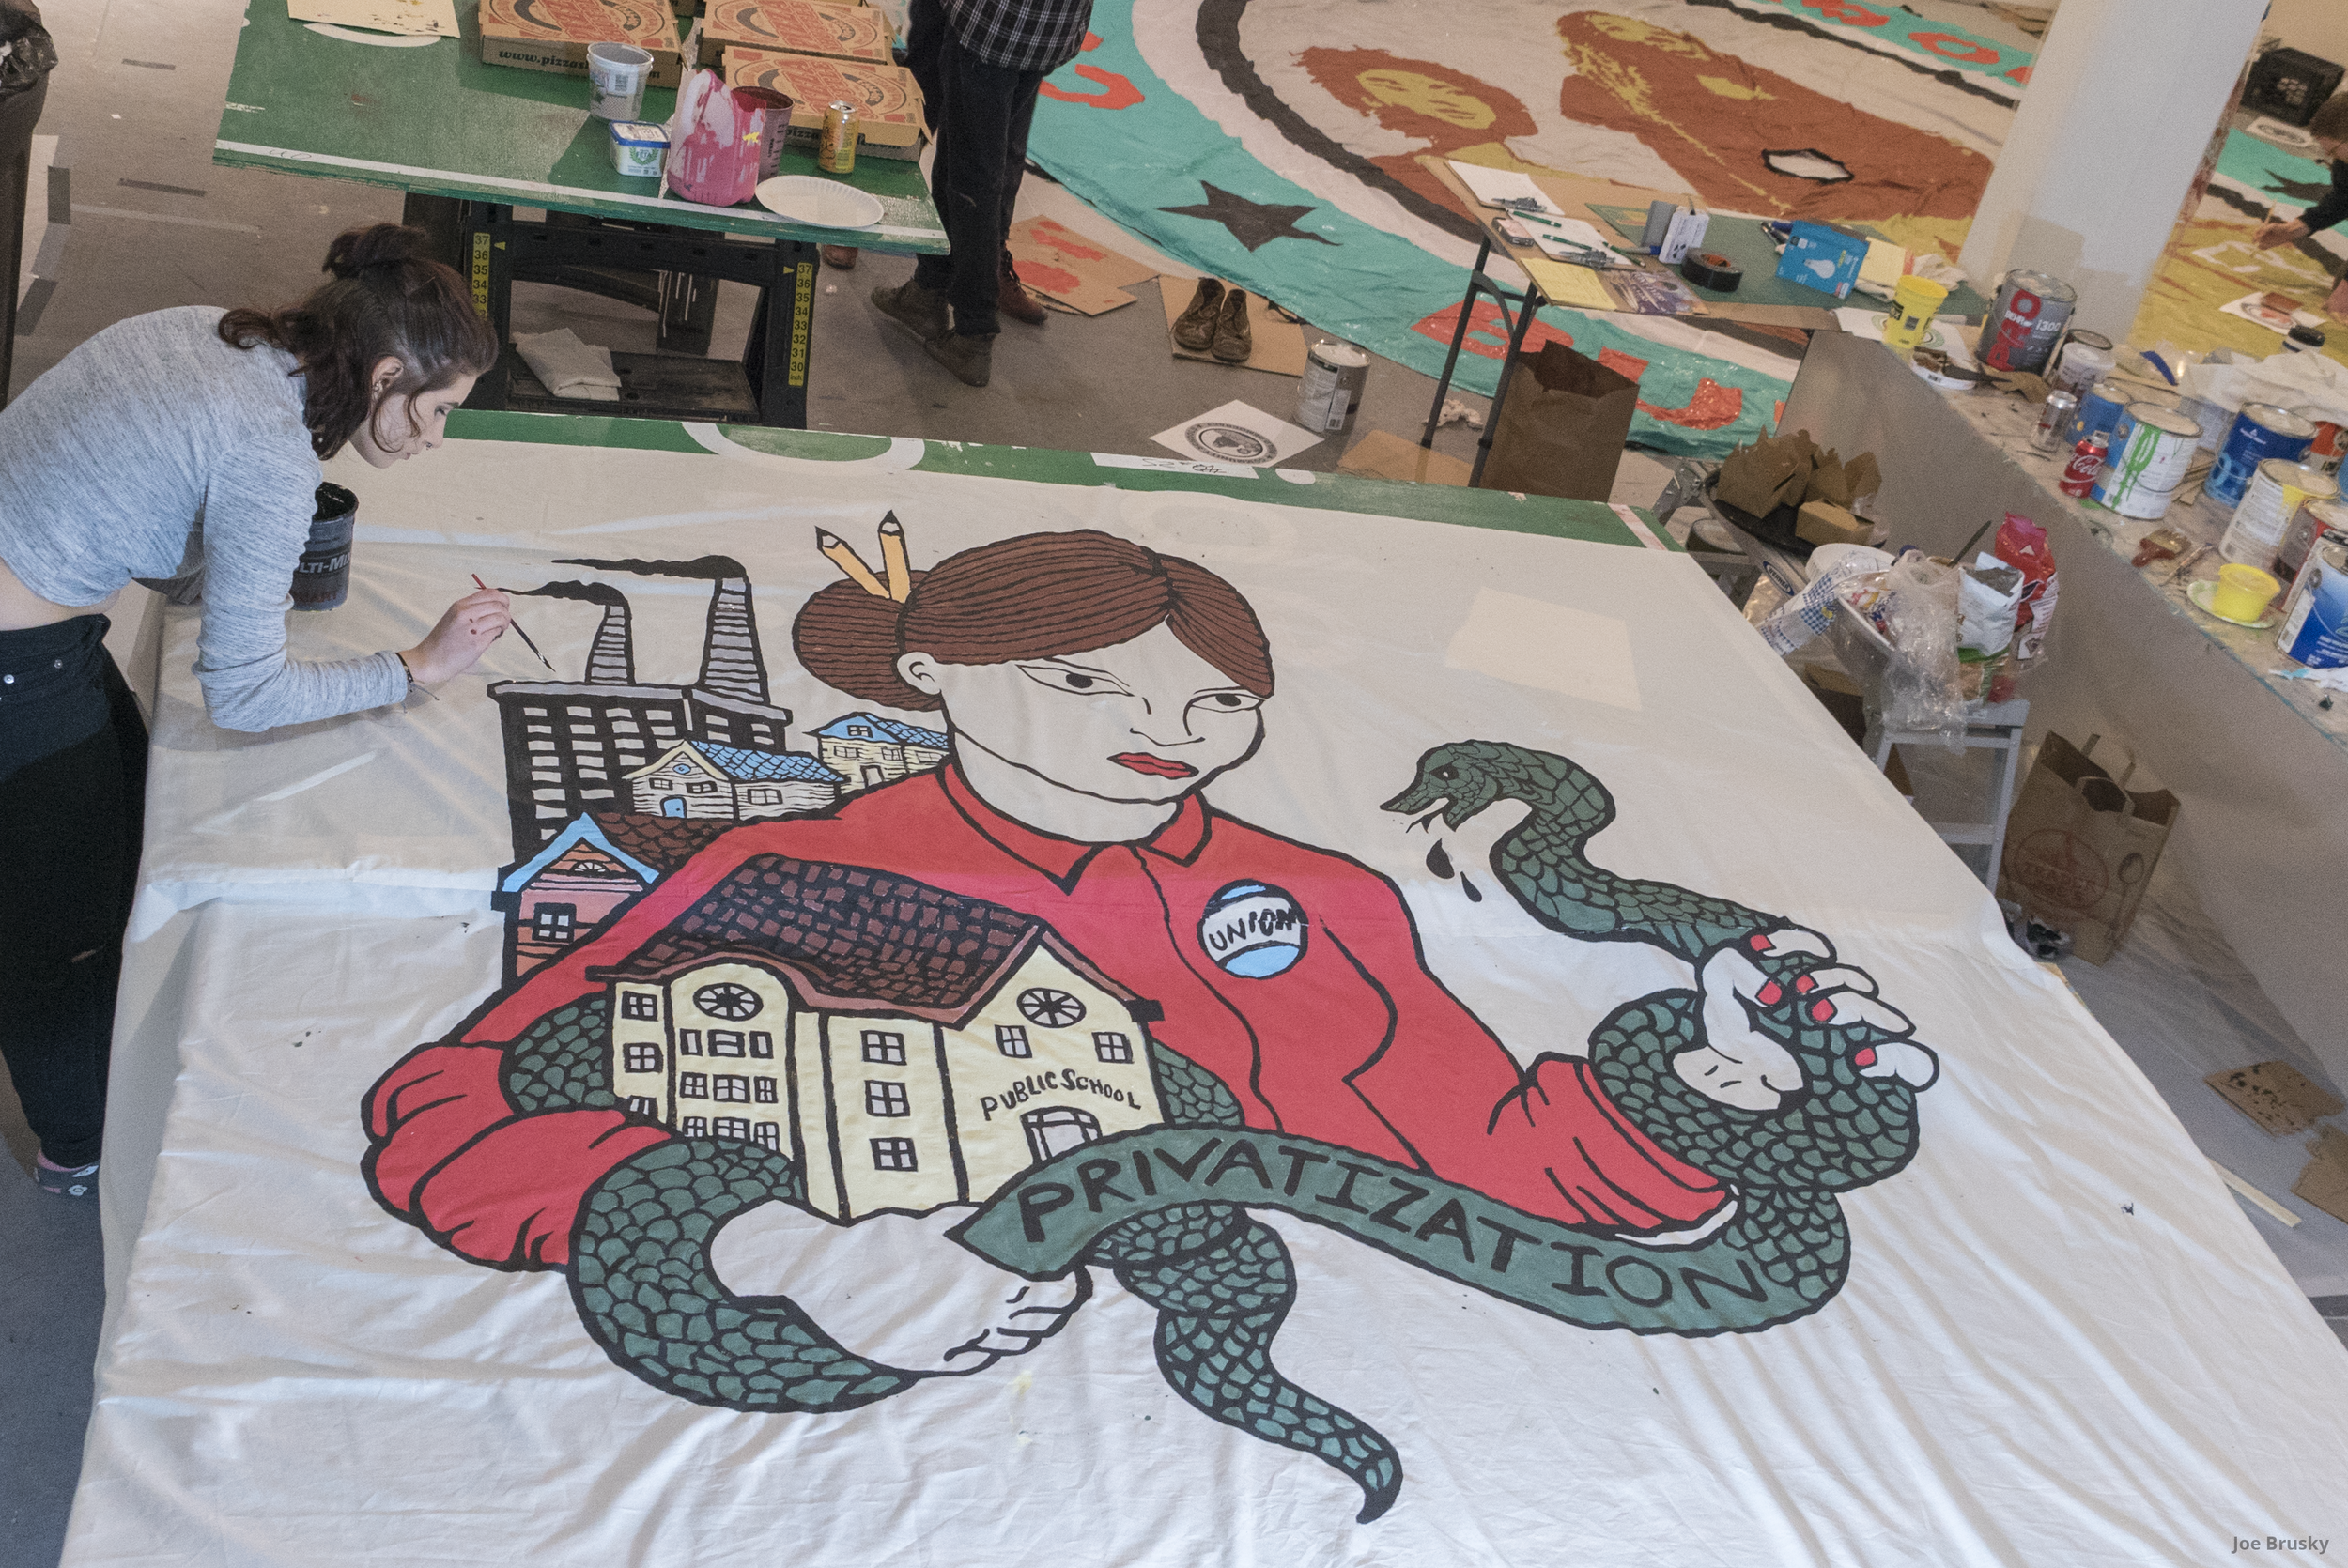  Pro Public Education banners, parachutes, and screen printed picket signs are produced at an art build with Milwaukee Teachers Education Association.  